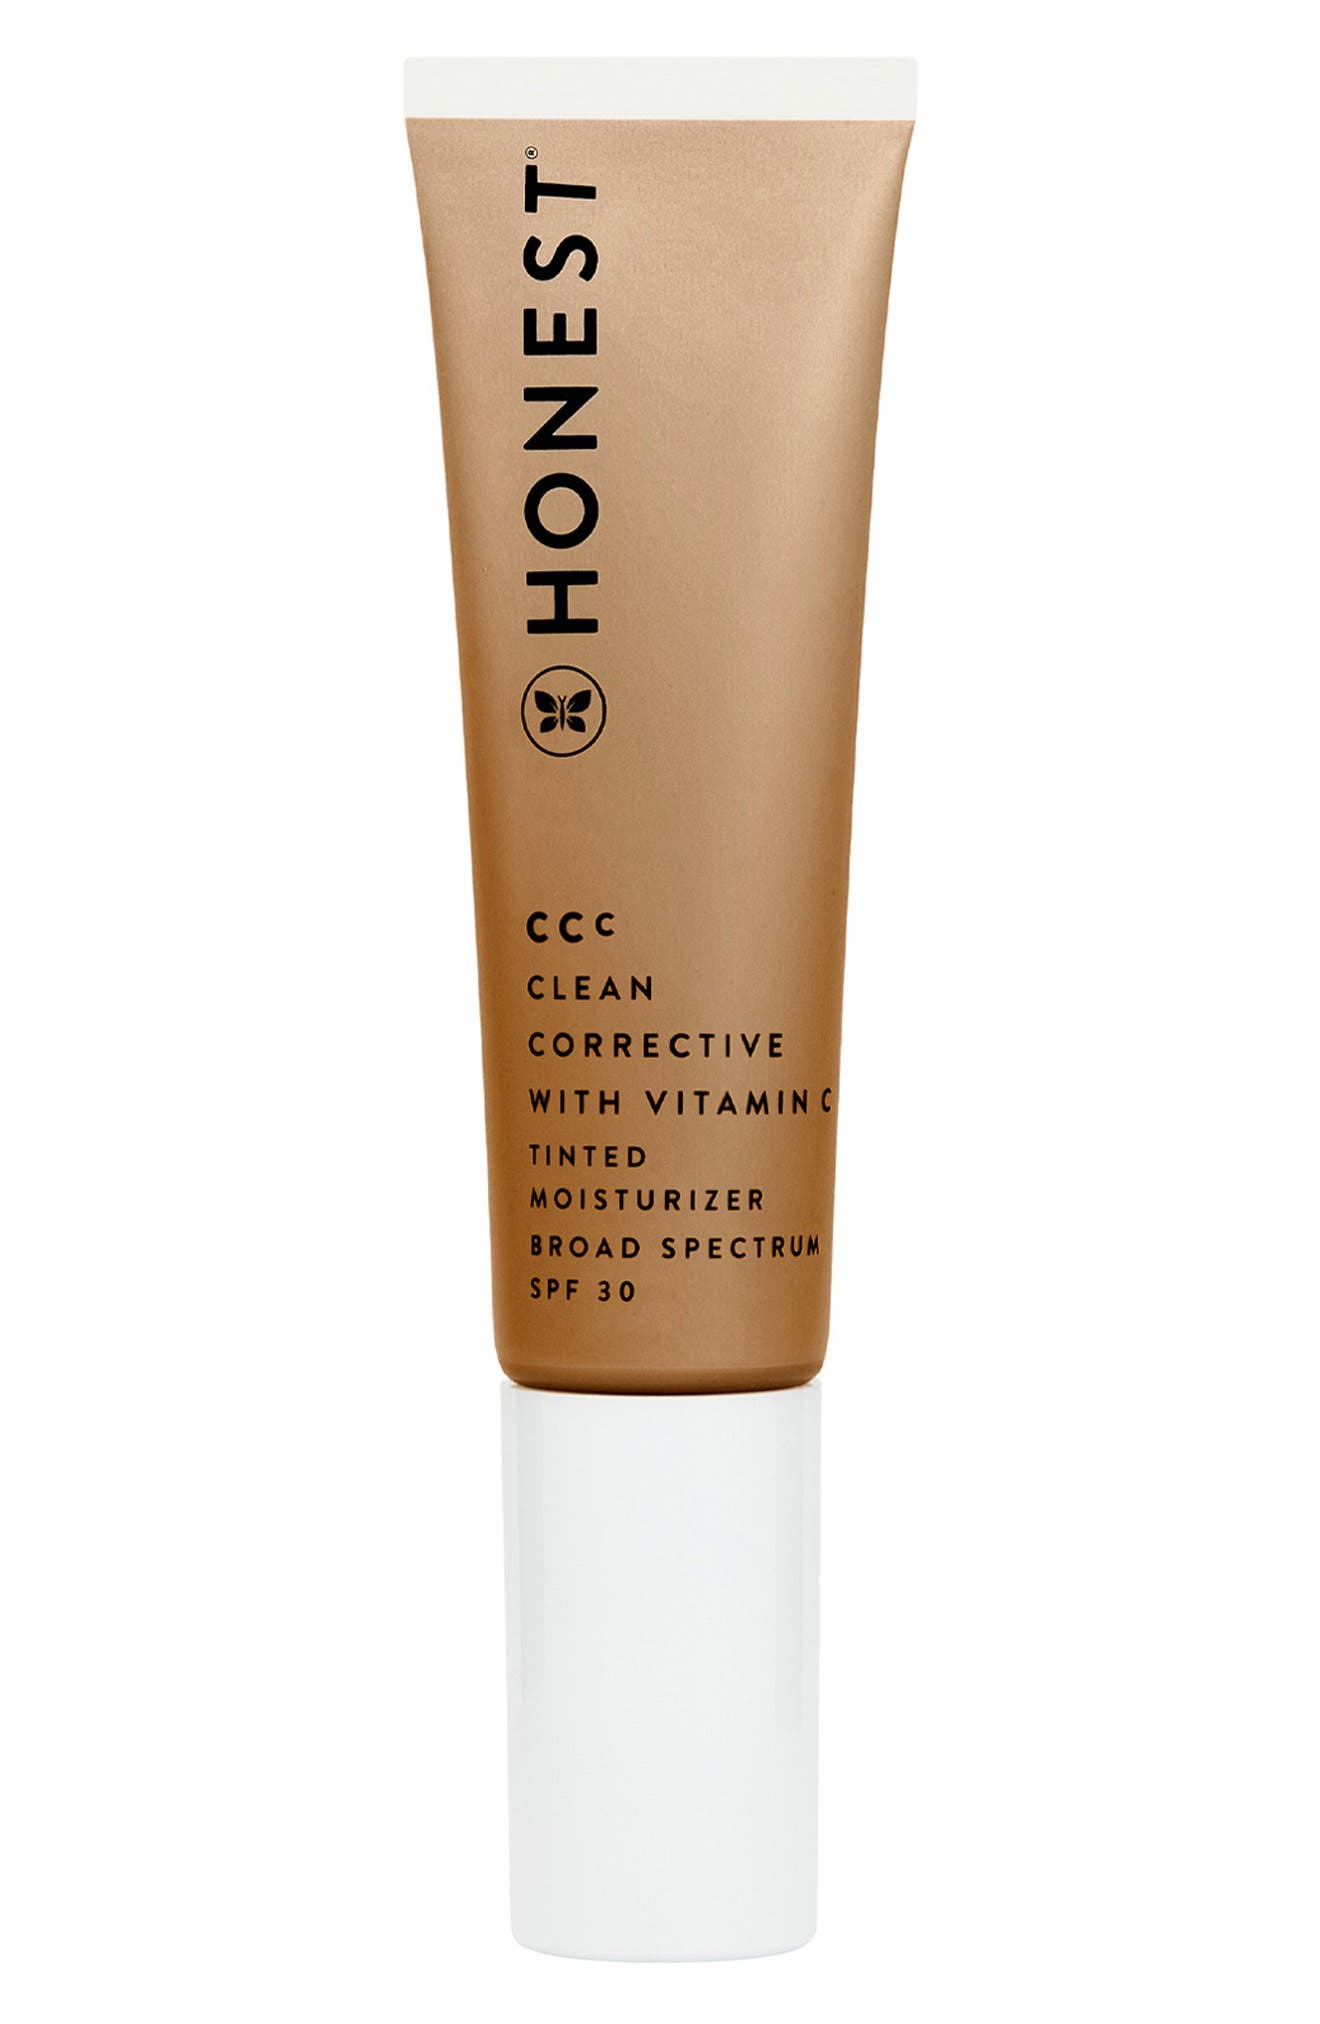 CCC CLEAN CORRECTIVE SPF 30 TINTED MOISTURIZER-picture-0